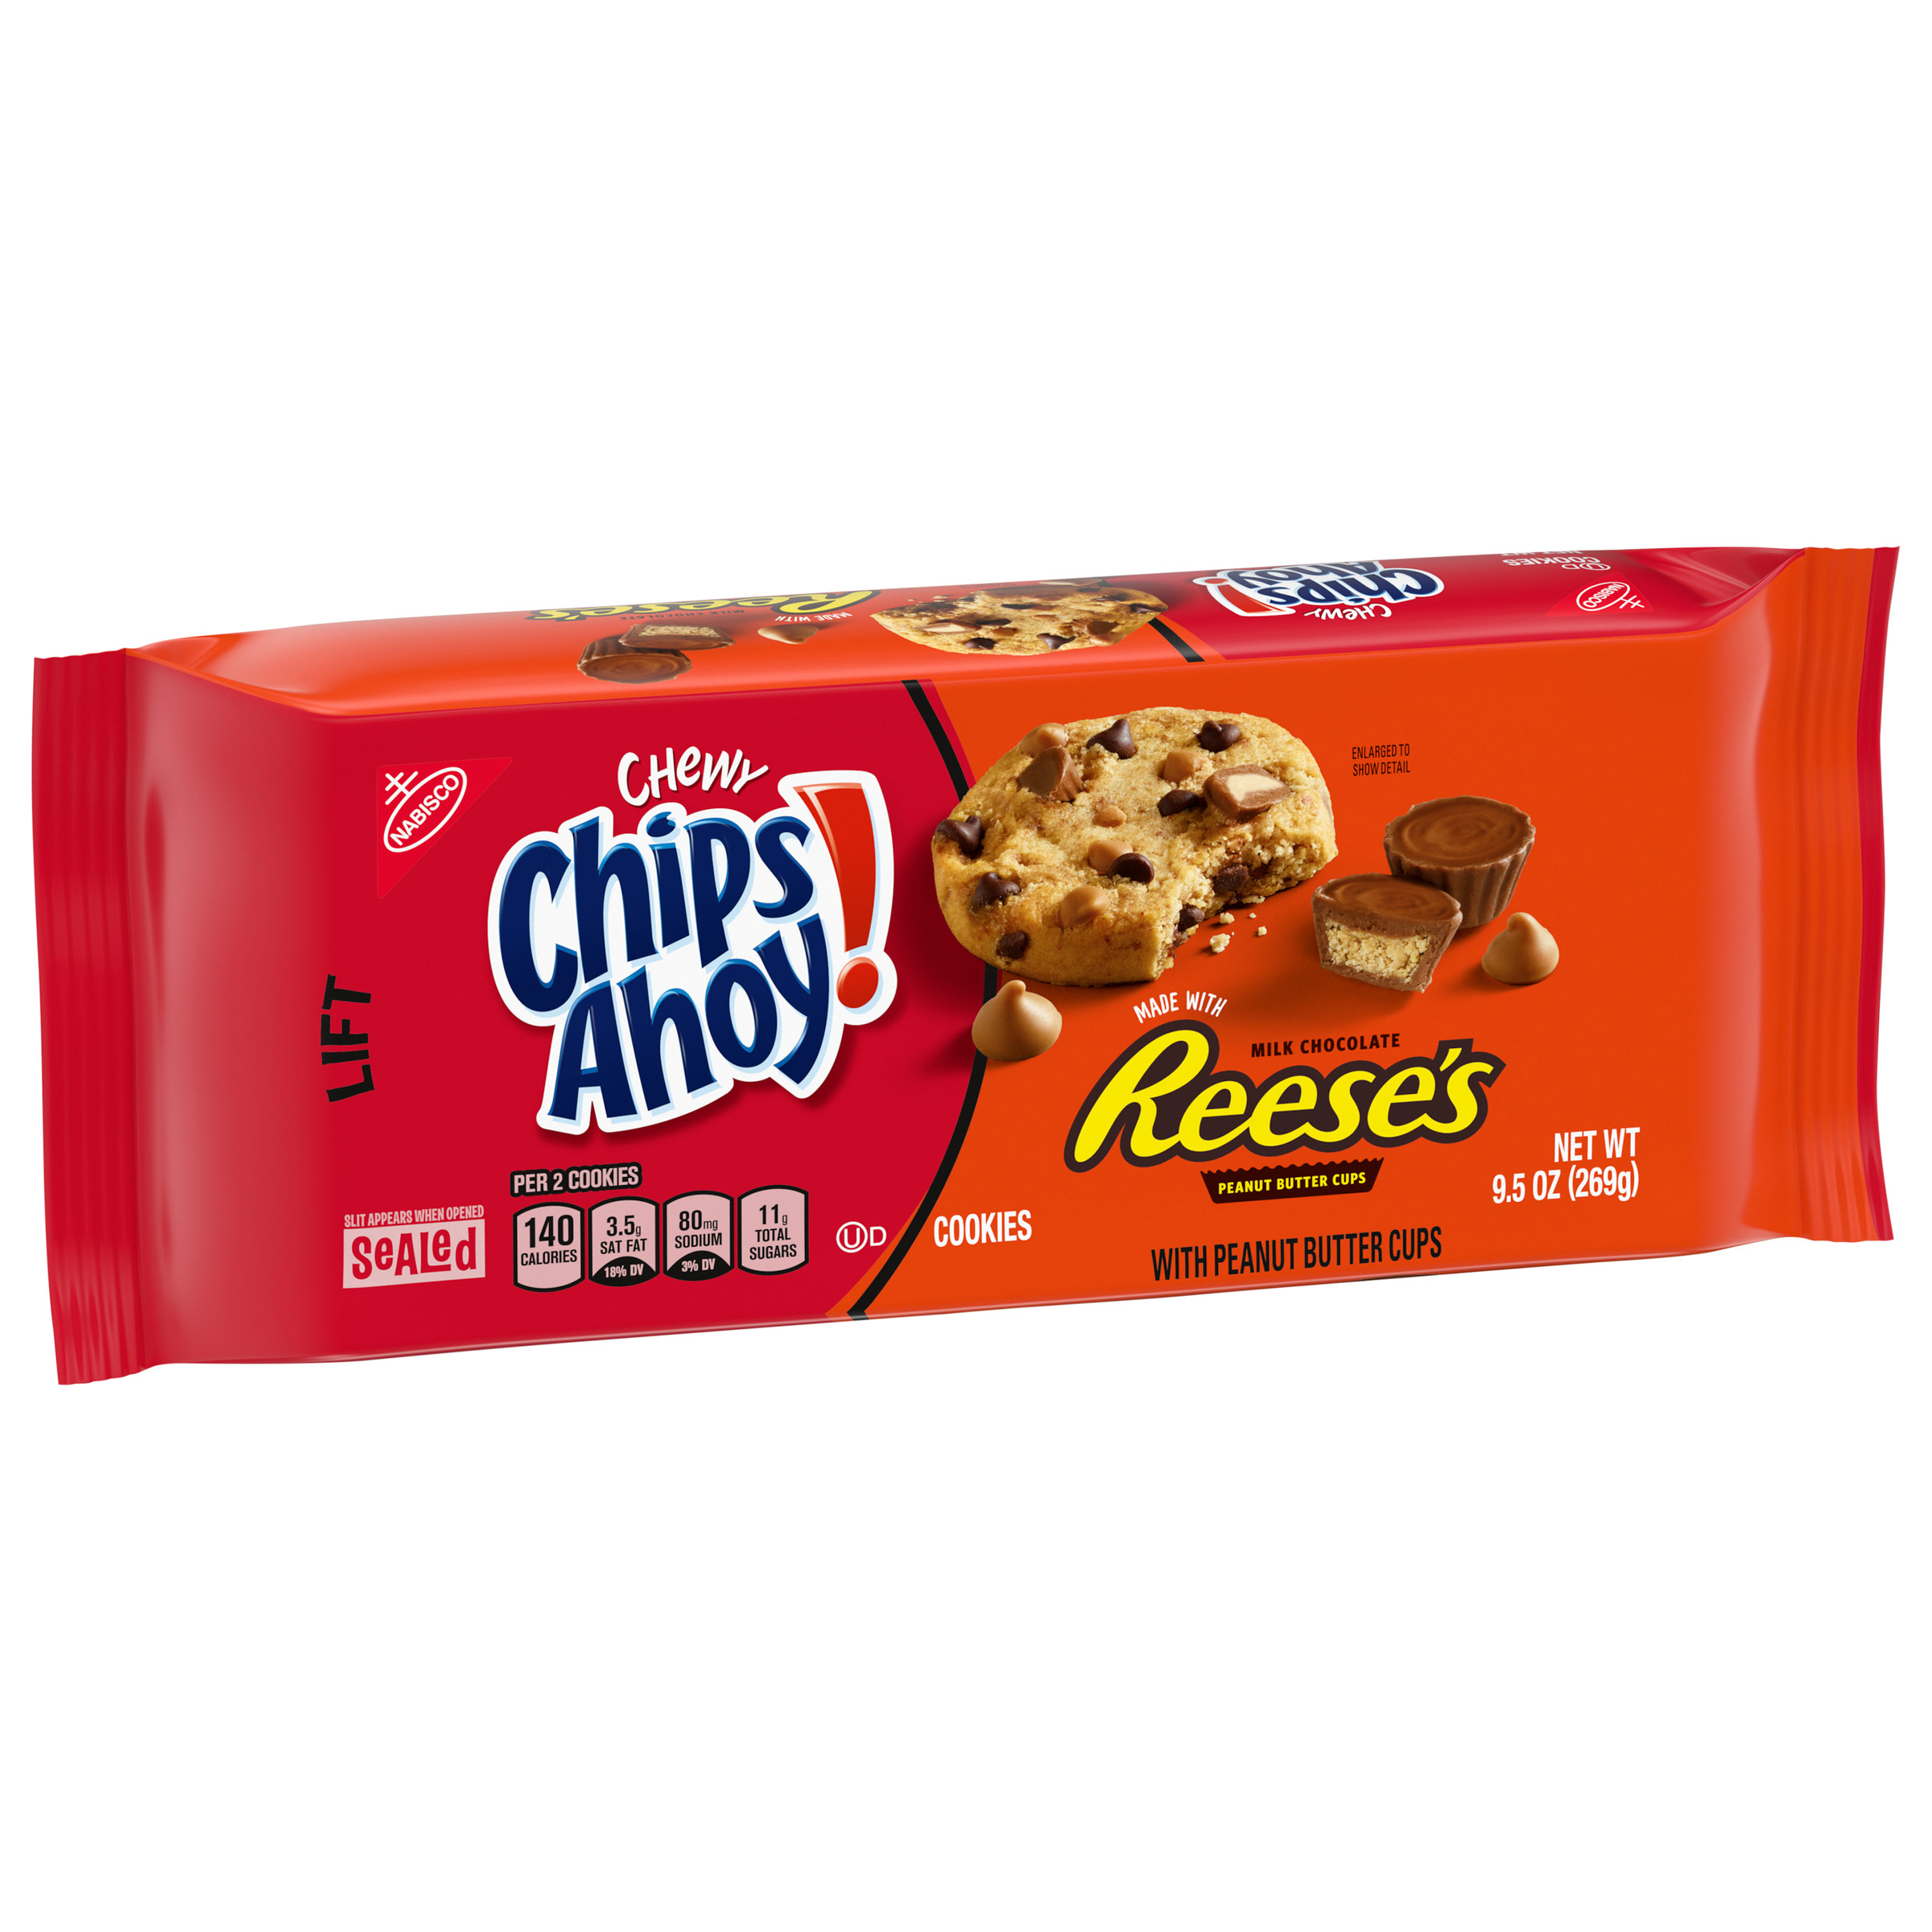 Chips Ahoy! Chewy Chocolate Chip Cookies With Reese'S Peanut Butter Cups, 9.5 Oz - image 2 of 10